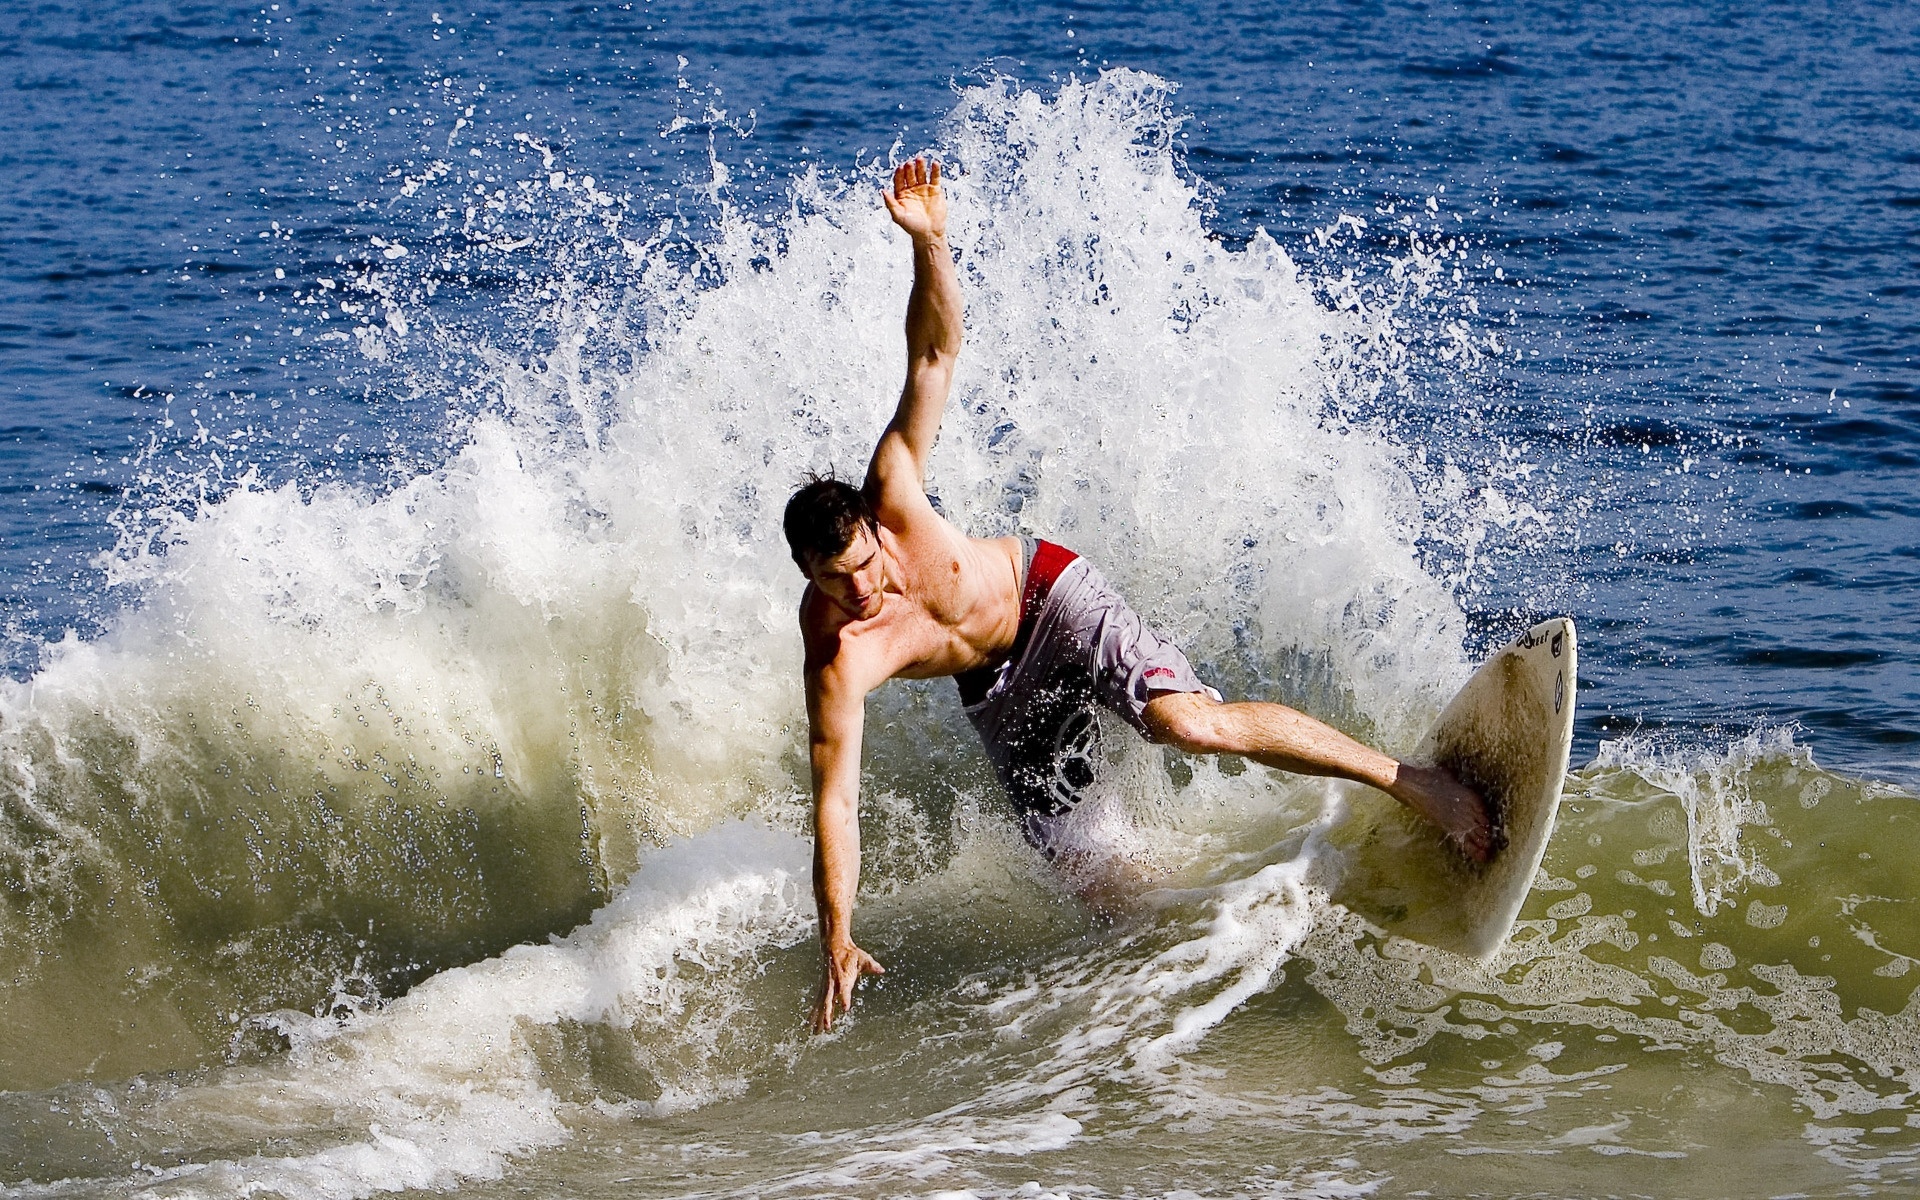 Surfing: Falling from a shortboard, Recreational outdoor activity, Water sport. 1920x1200 HD Background.